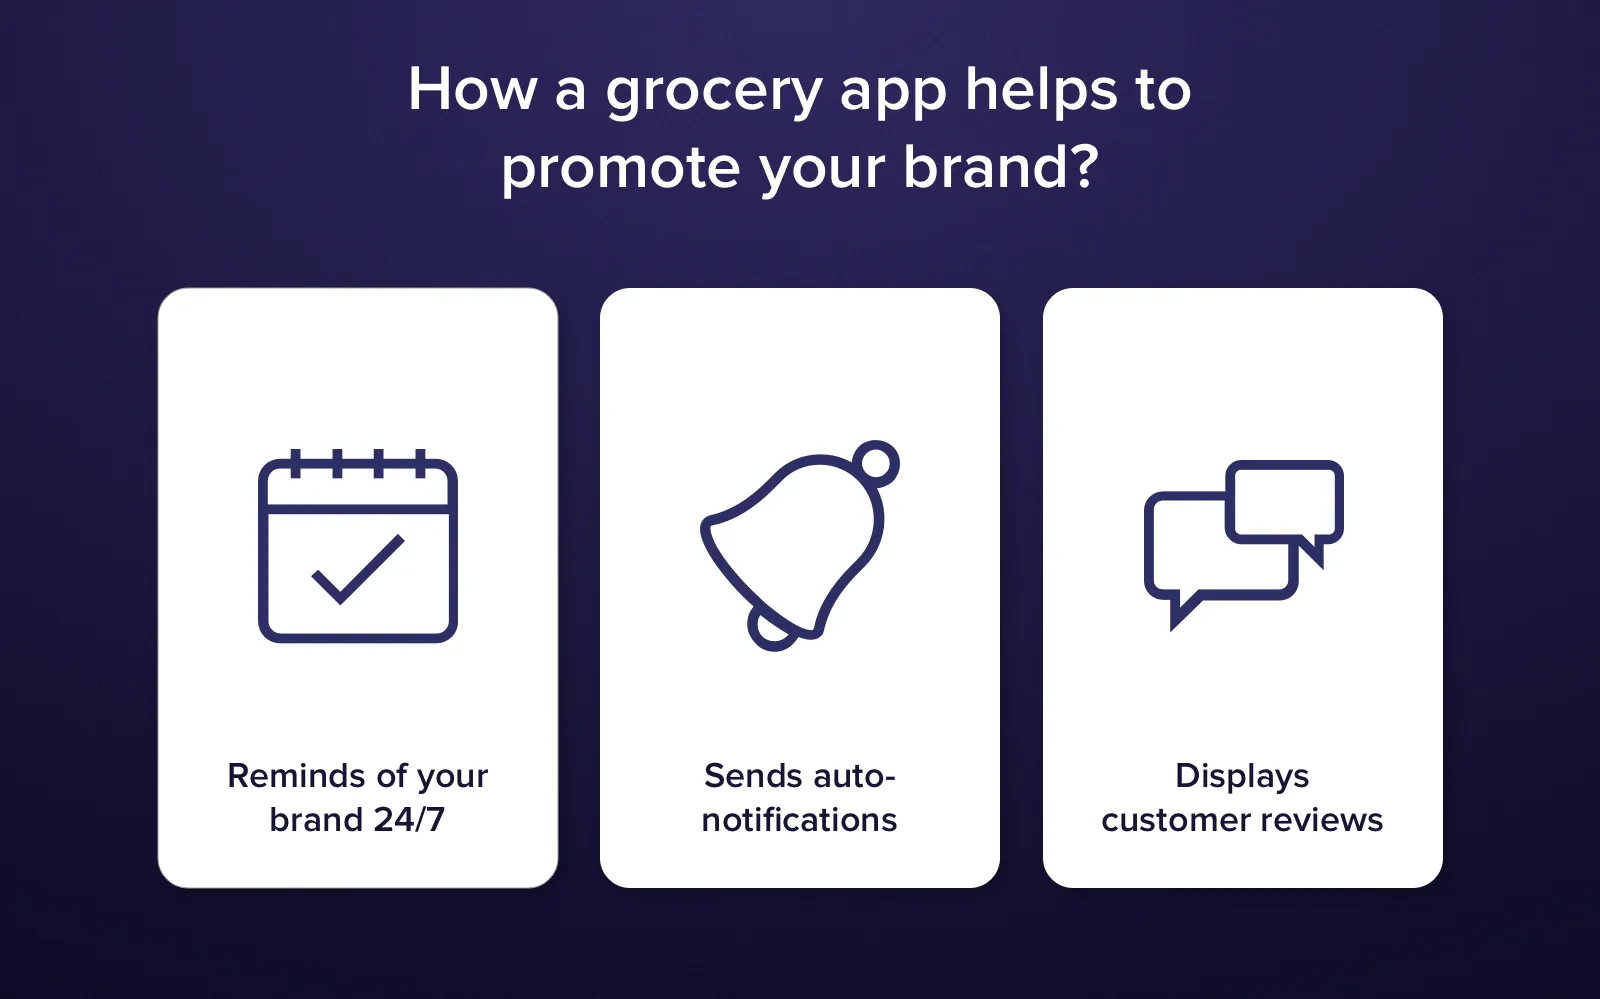 How a grocery shopping app helps to promote your brand